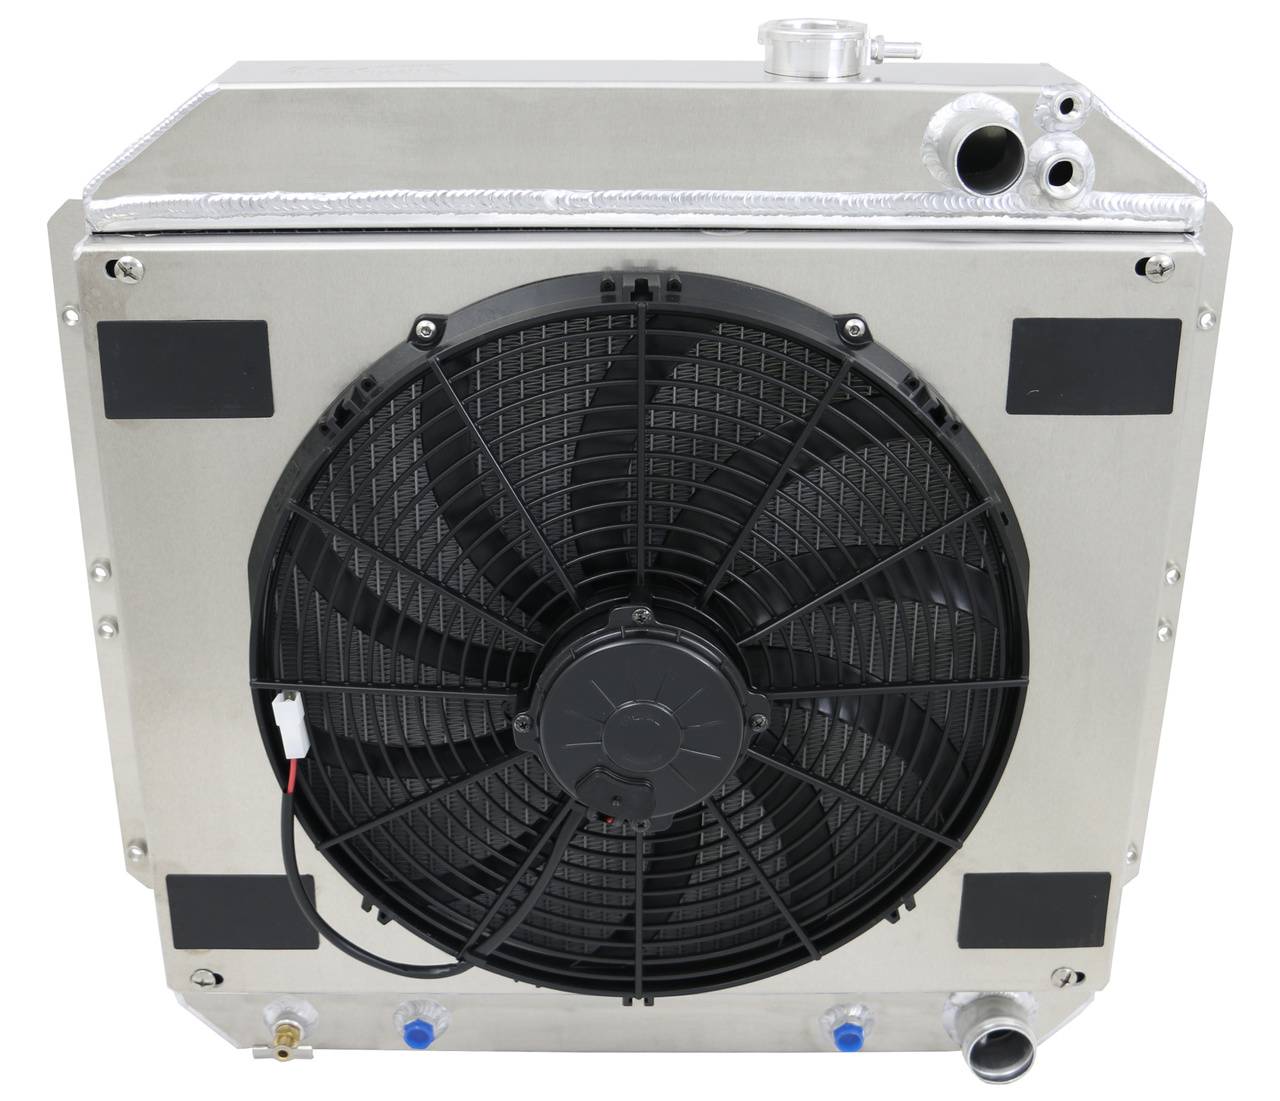 Wizard Cooling Inc - Wizard Cooling - 1949-1954 Chevrolet Bel Air/ Impala Aluminum Radiator With Fan - 10024-118LSMD